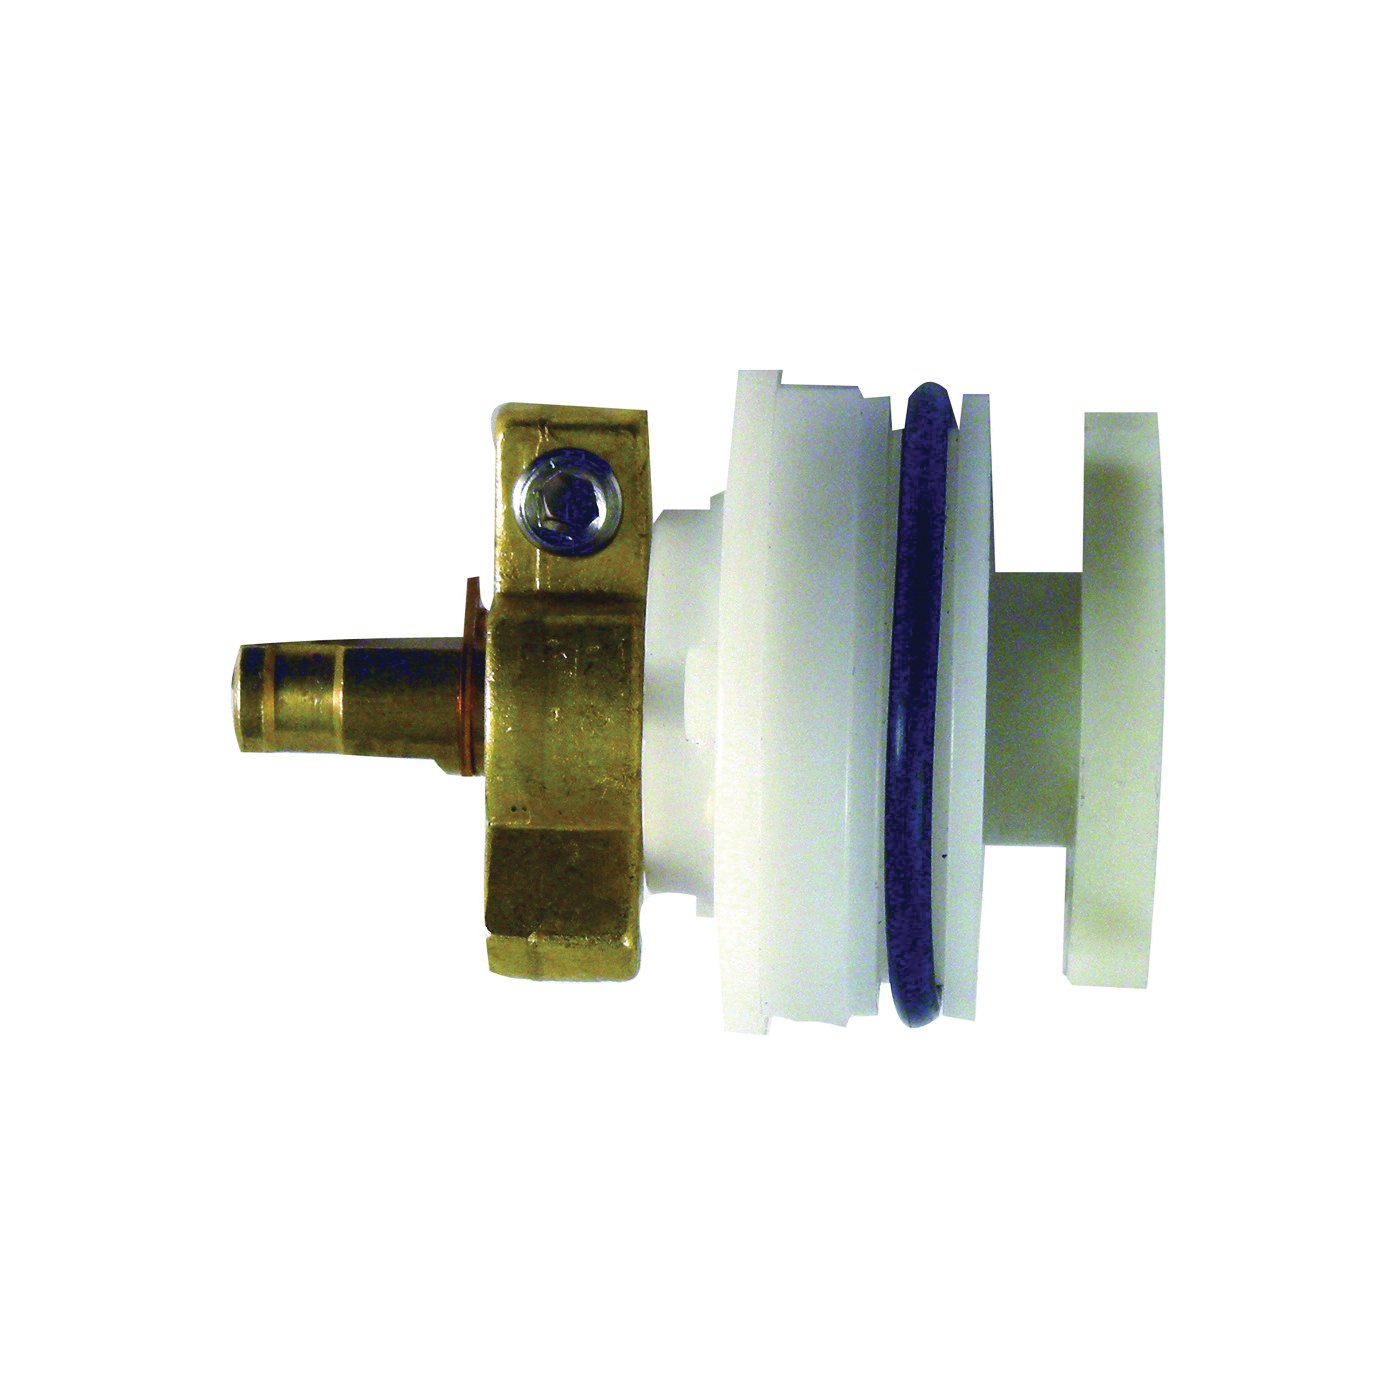 80964 Faucet Cartridge, Brass/Plastic, 2 in L, For: Delta Scald-Guard Single Lever 1991 Tub/Shower Faucets